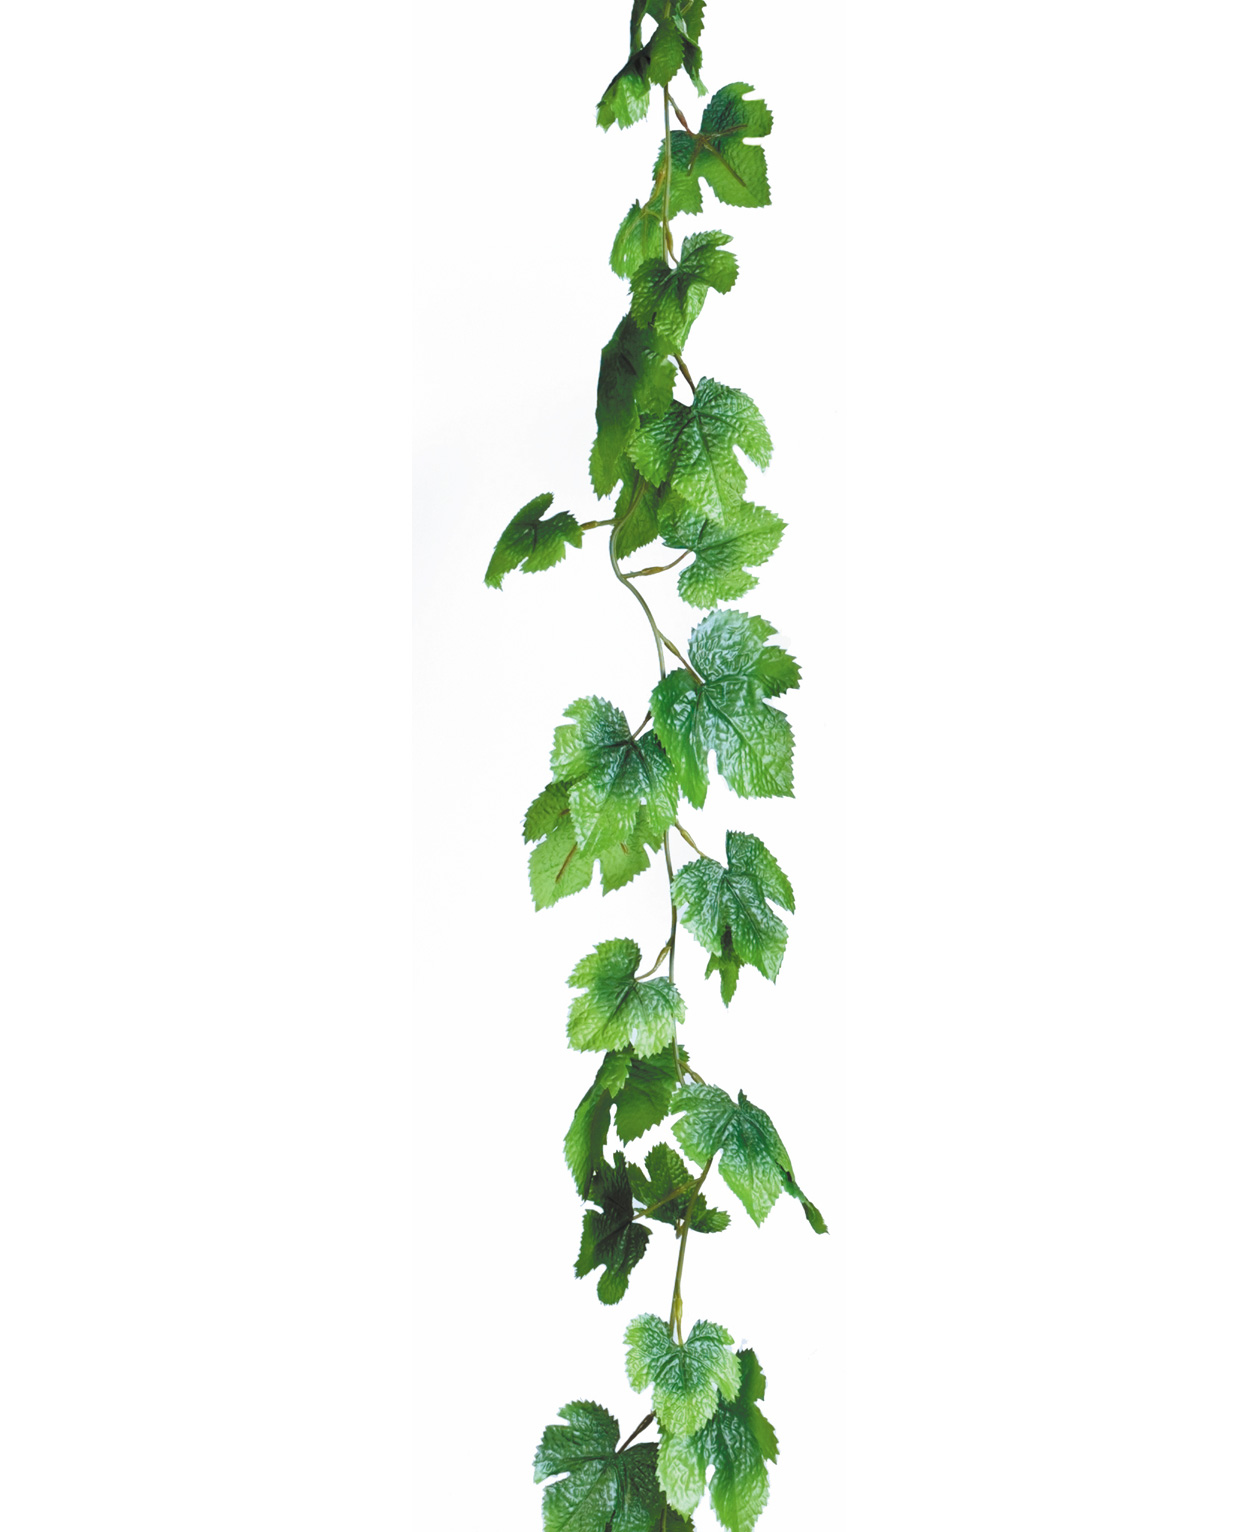 English ivy clipart.